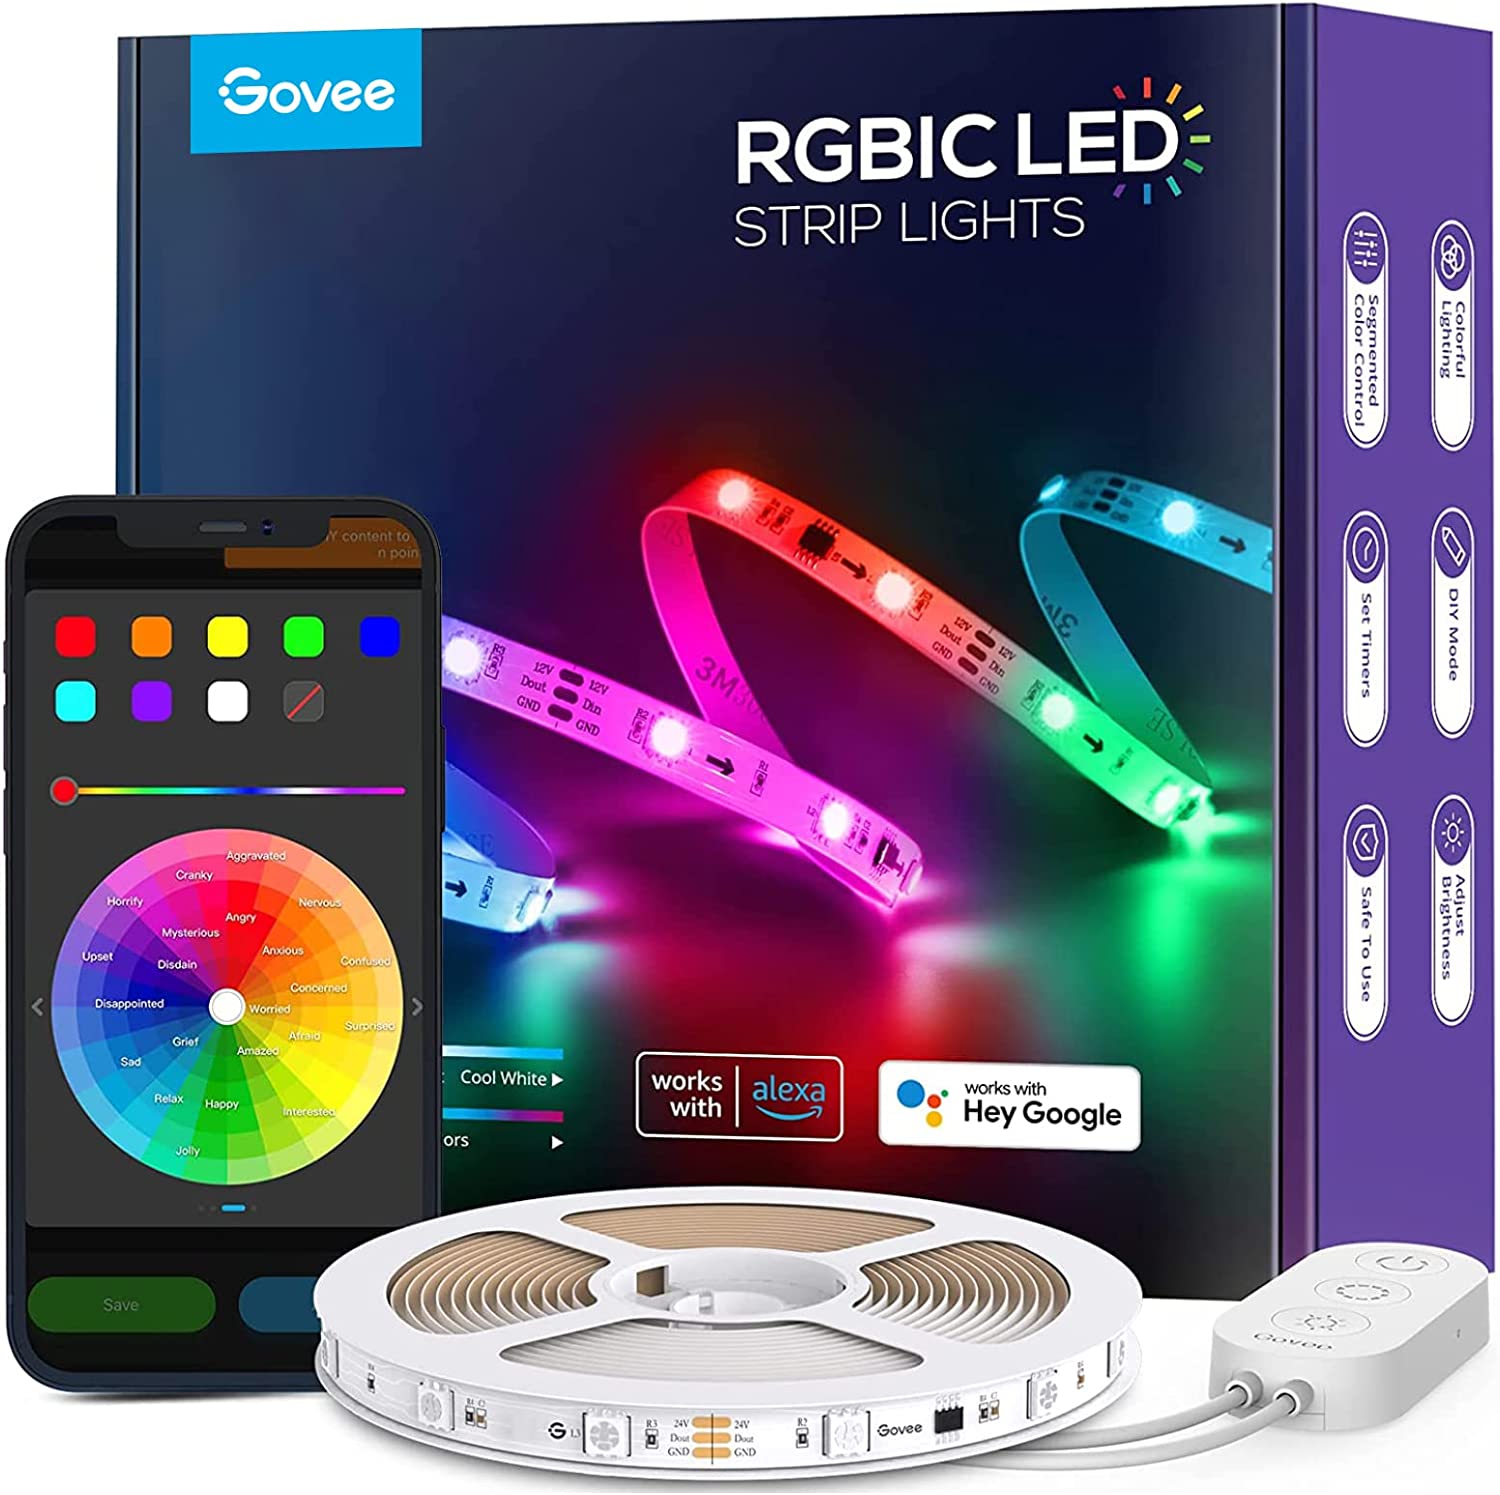 Govee RGBIC LED Strip Lights With Smart Segmented Color Control - Find My  Setup